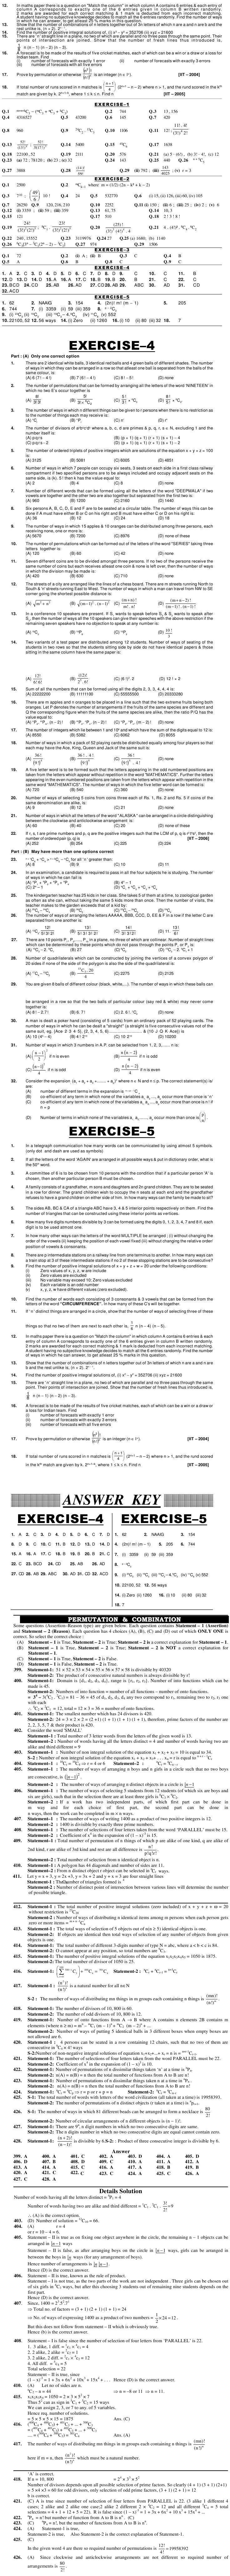 Maths Study Material - Chapter 4